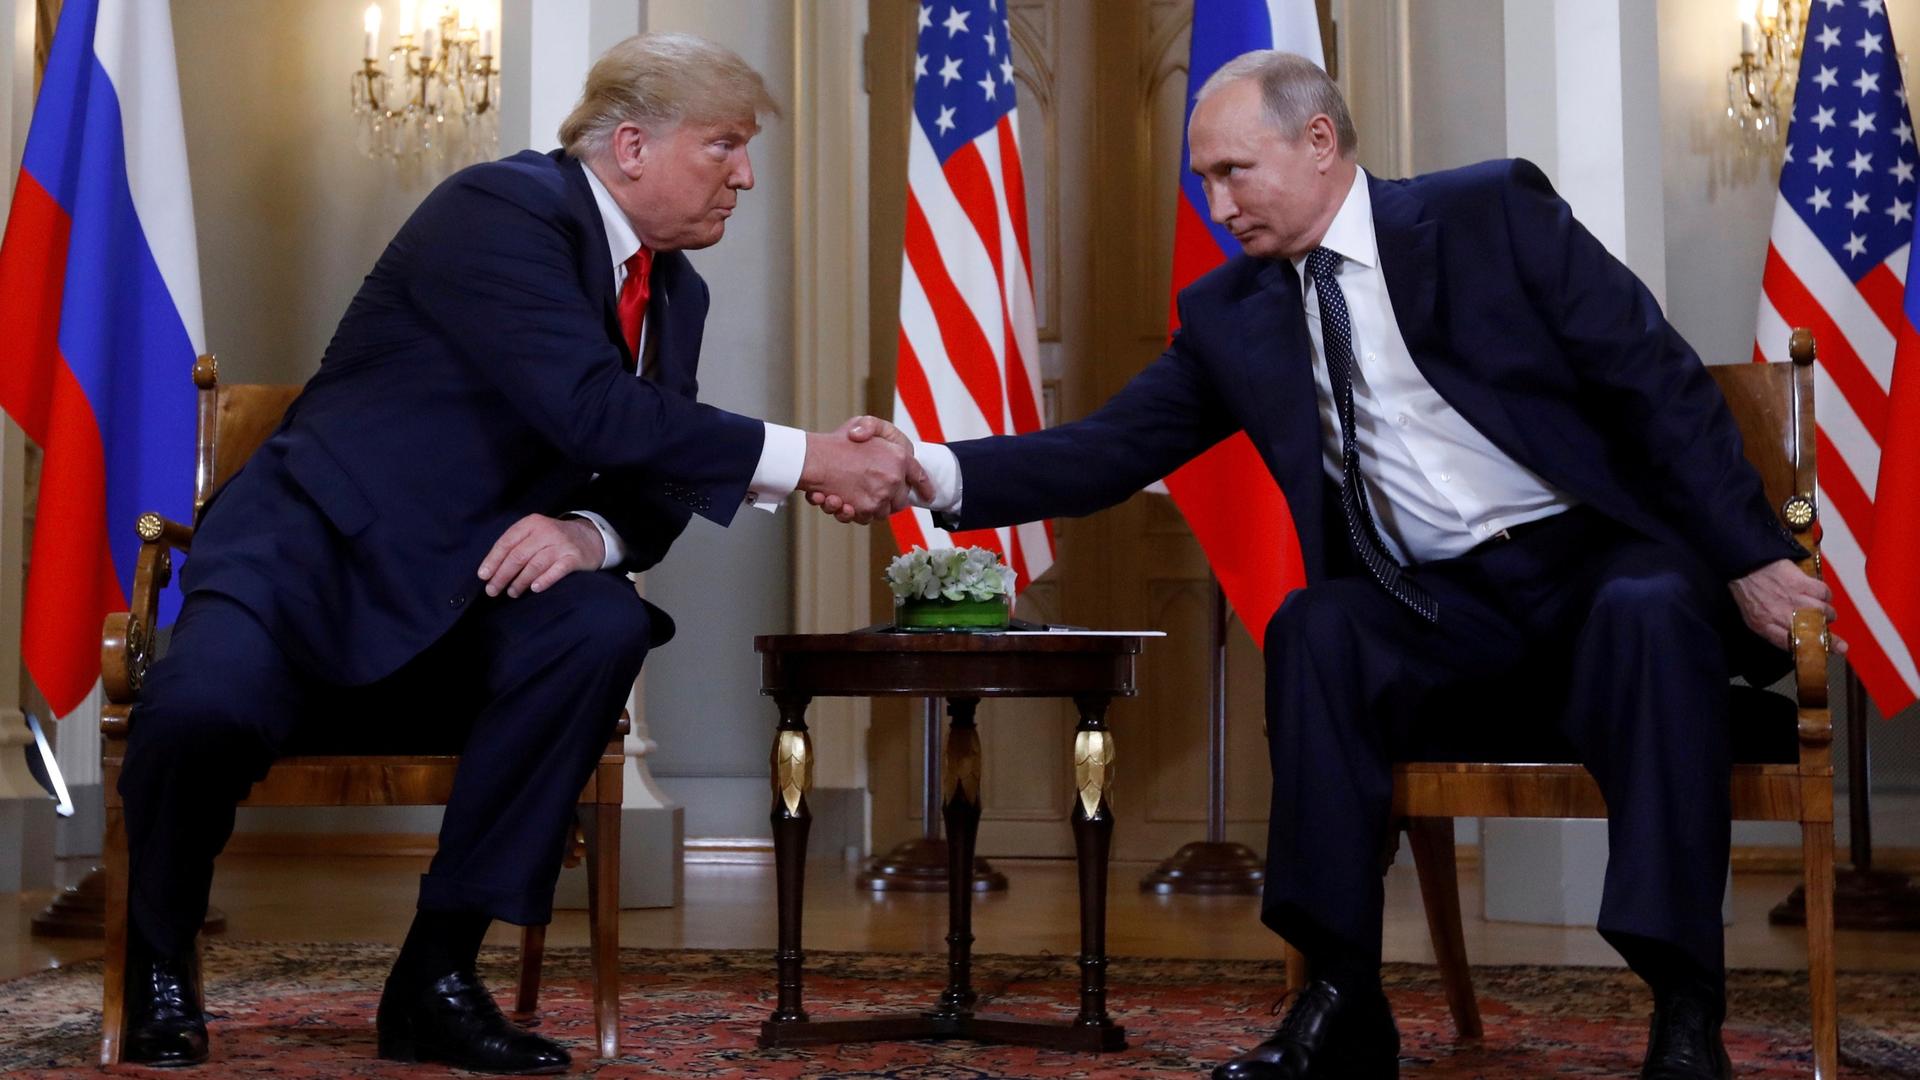 US President Donald Trump and Russia's President Vladimir Putin shake hands as they meet in Helsinki, Finland on July 16, 2018. 